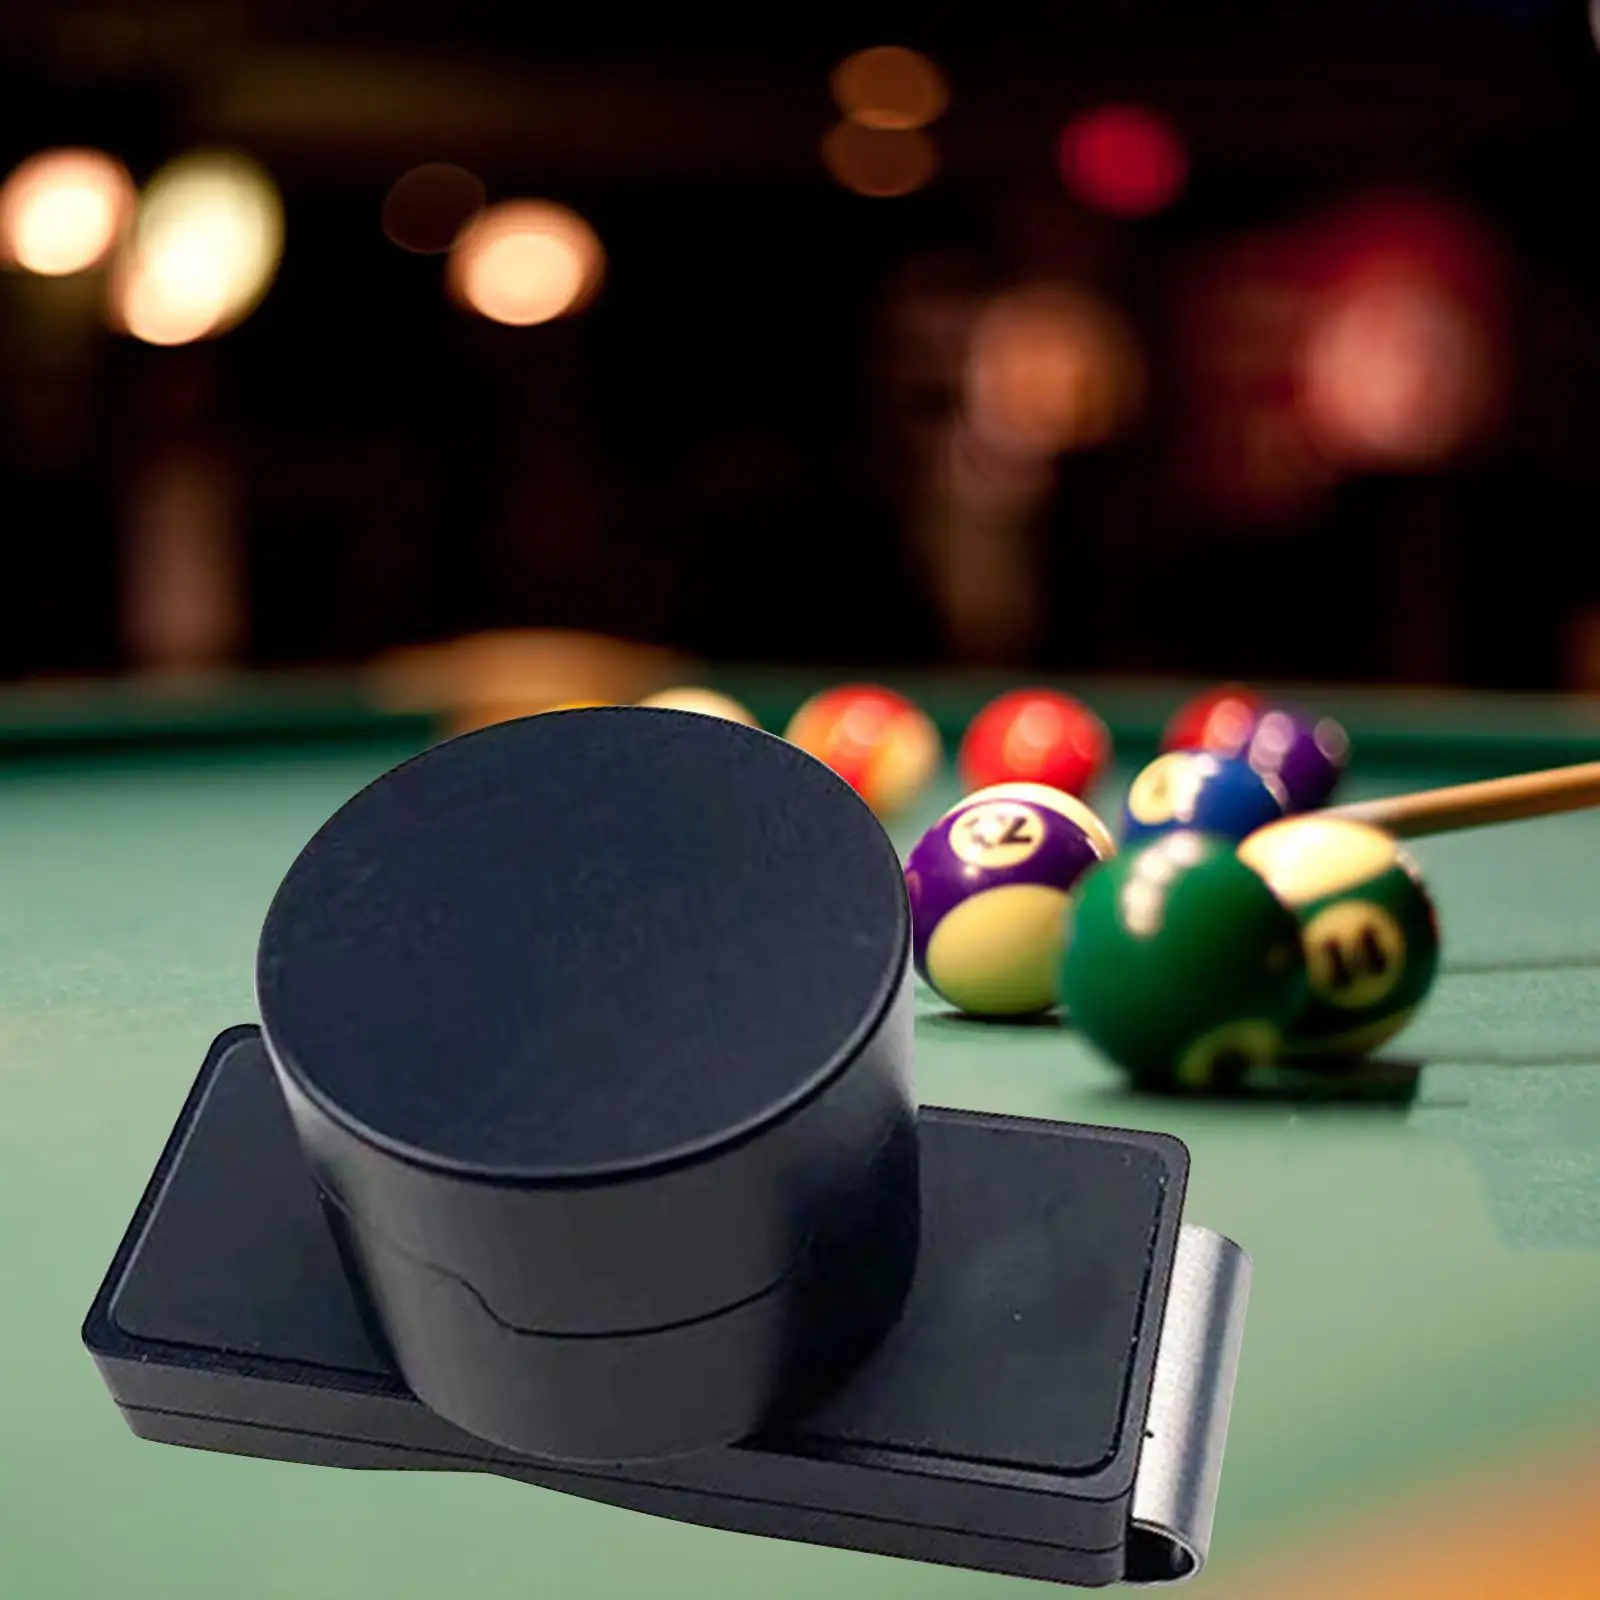 Portable Billiard Chalk Holder Easy to Use Practical Tool Billiards Pool Cue Chalk Holder Entertainment Pool Table Accessories